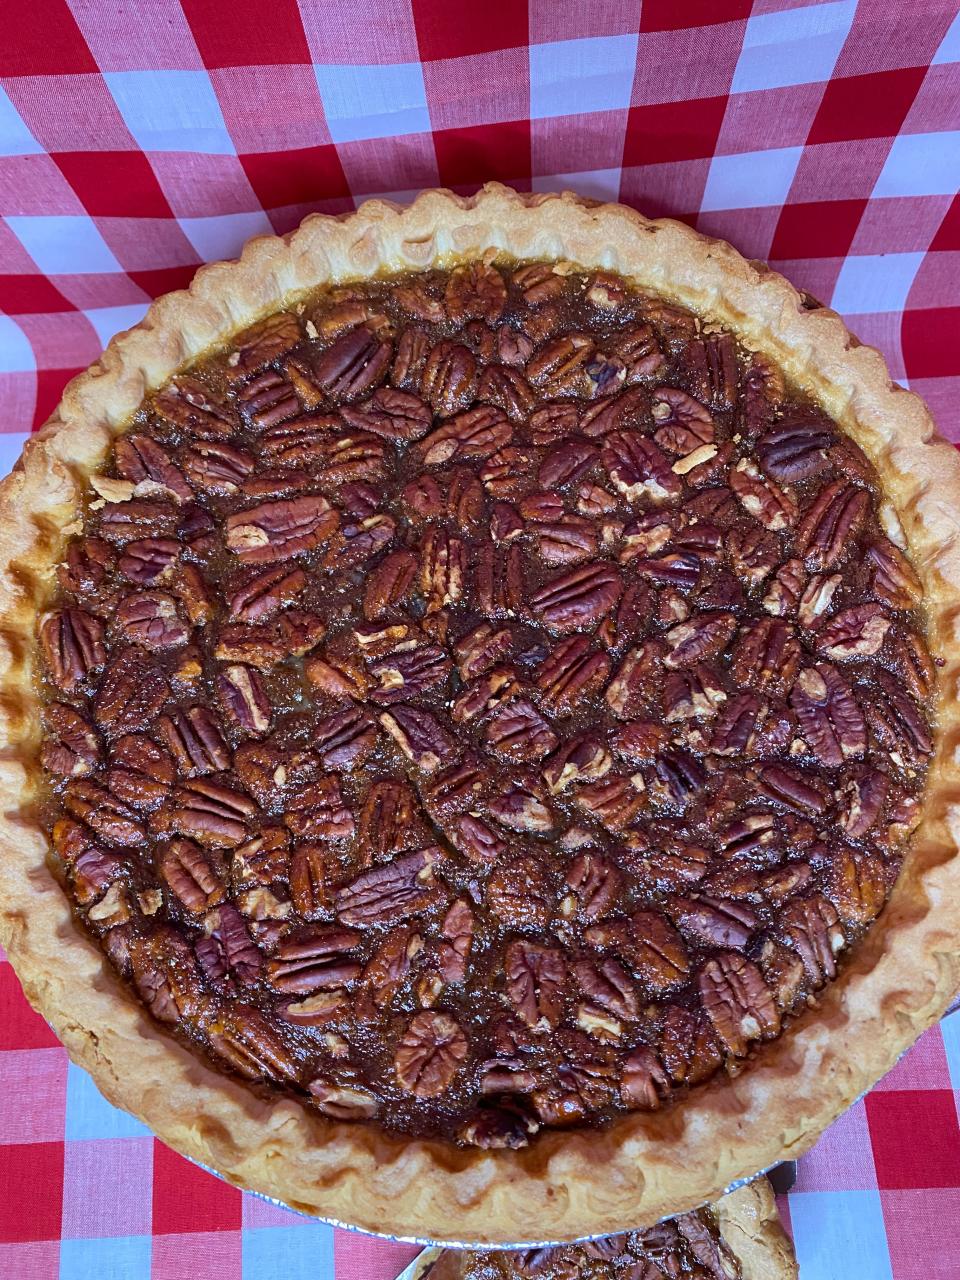 A pecan pie from Out Post Farm in Holliston.